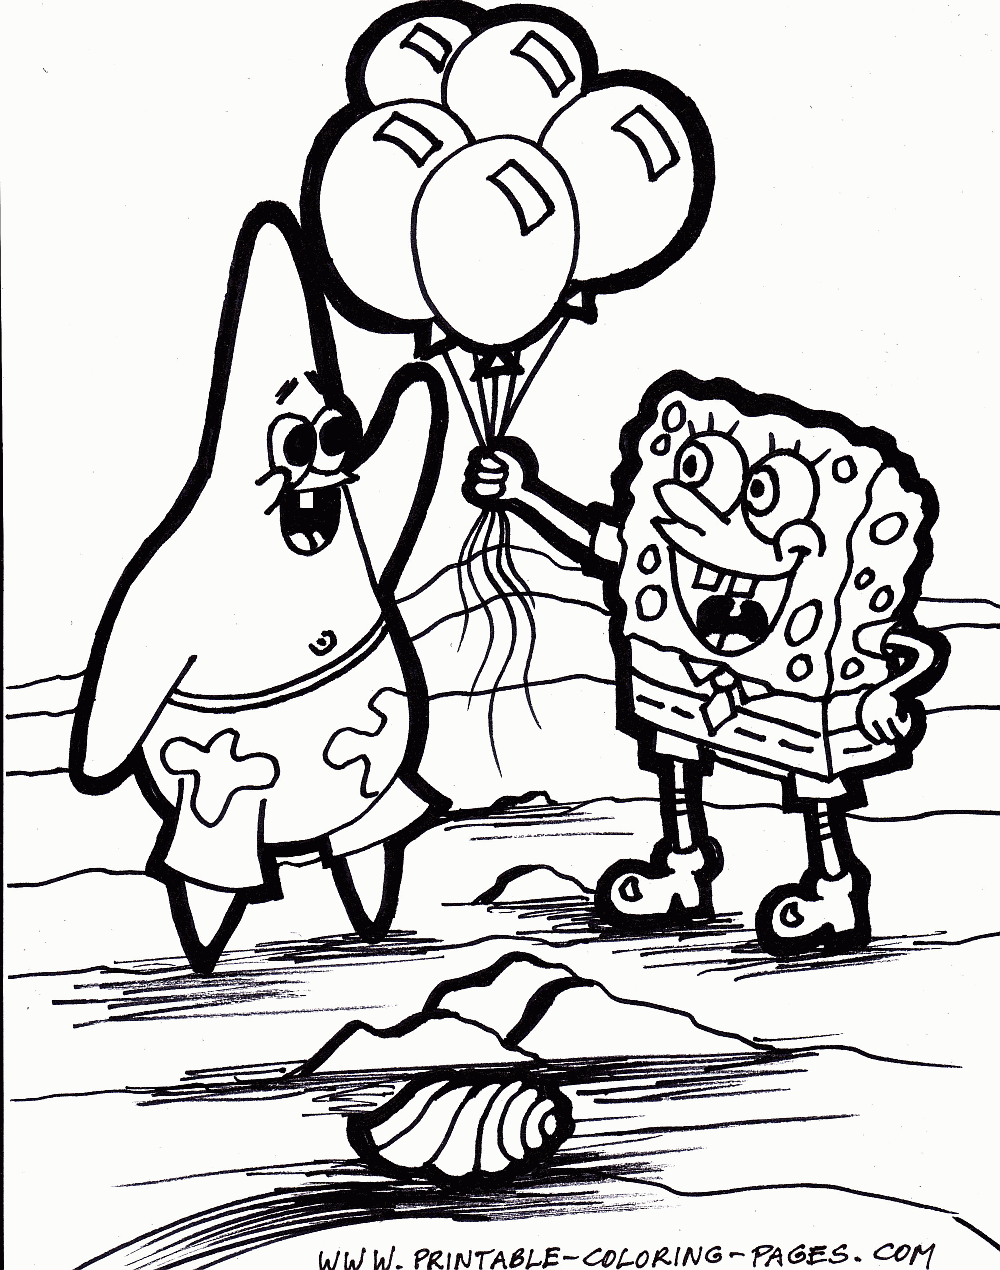 Cartoons Coloring Pages: Spongebob and Patrick Coloring Pages